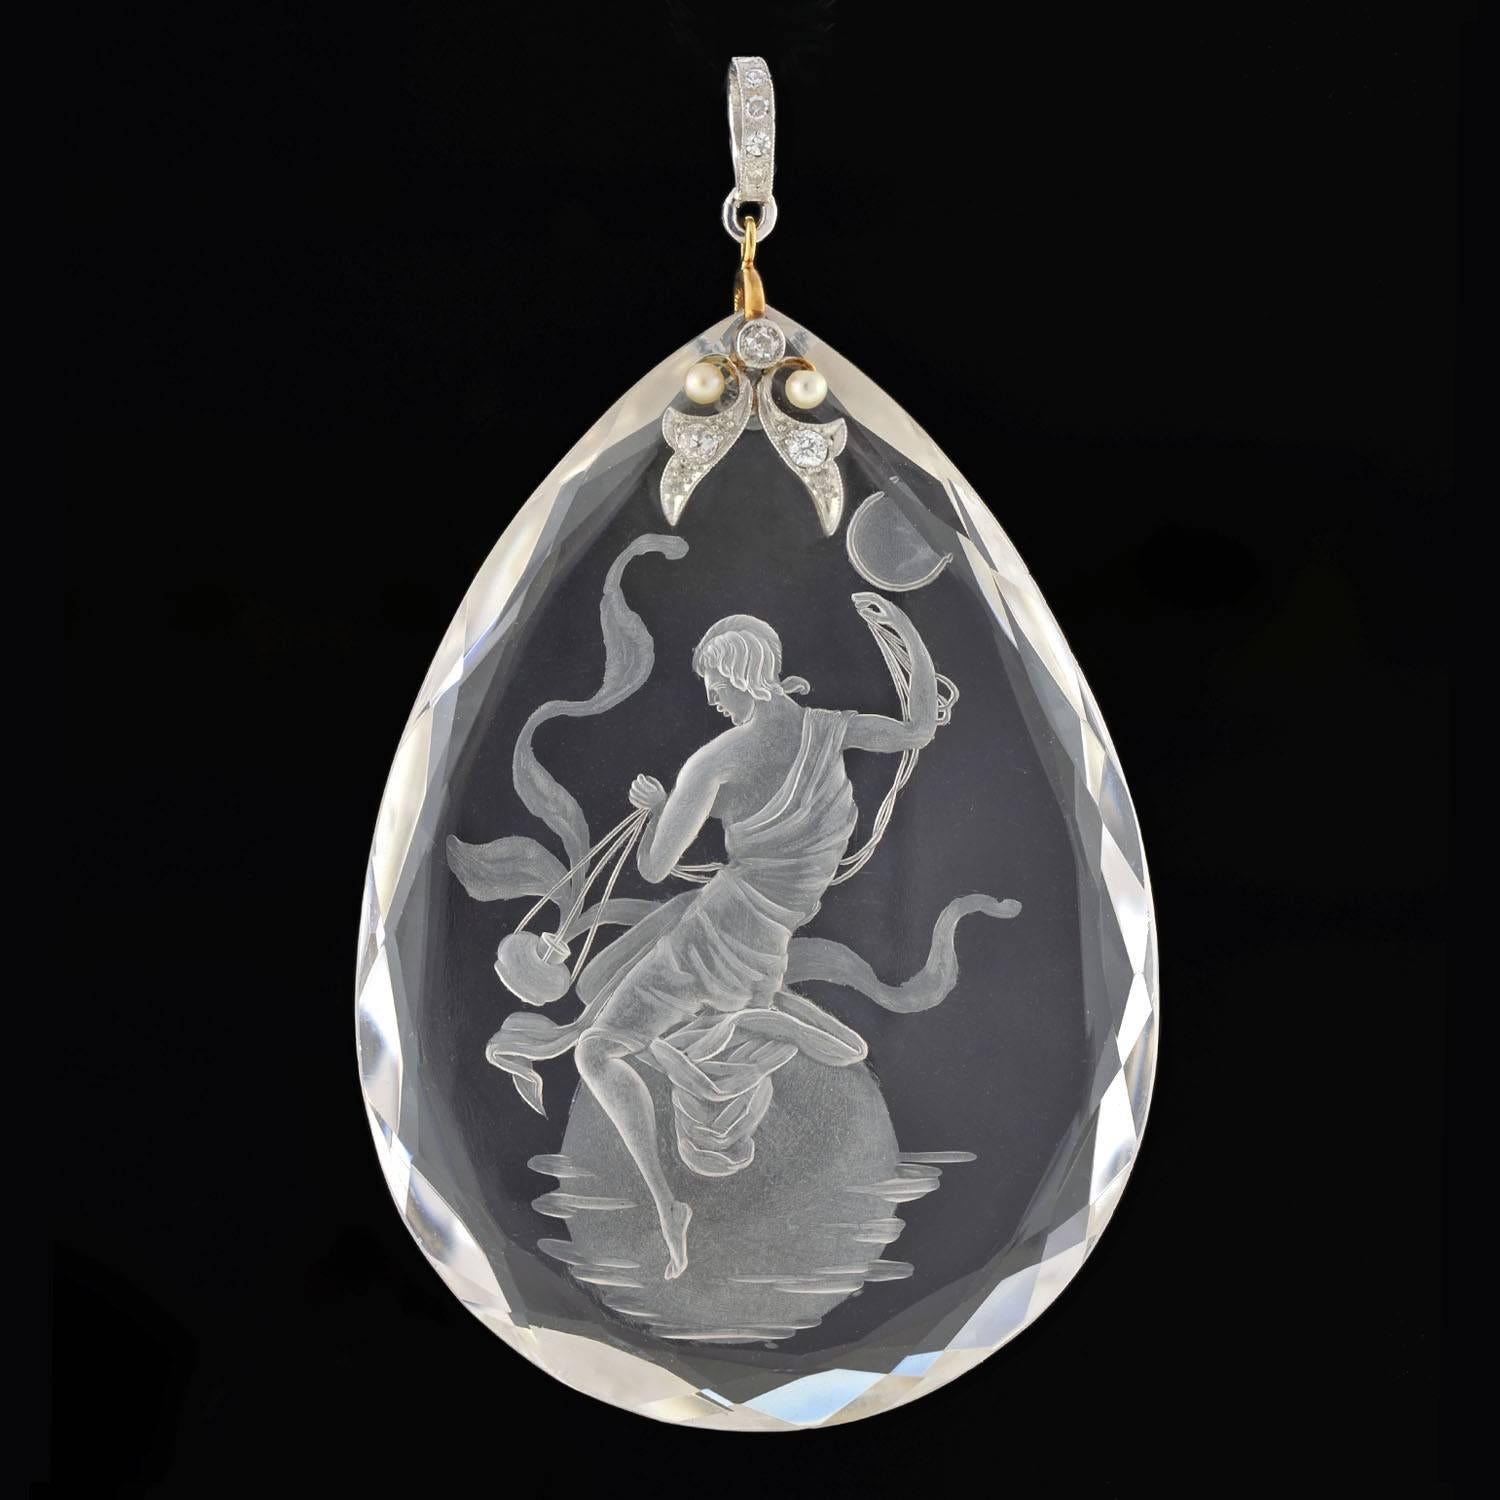 A gorgeous carved crystal pendant from the Art Deco (ca1920) era! This fabulous piece is comprised of a stunning teardrop shaped reverse carved rock crystal pendant which hangs from a diamond and pearl encrusted bail. The carved image is of a robed